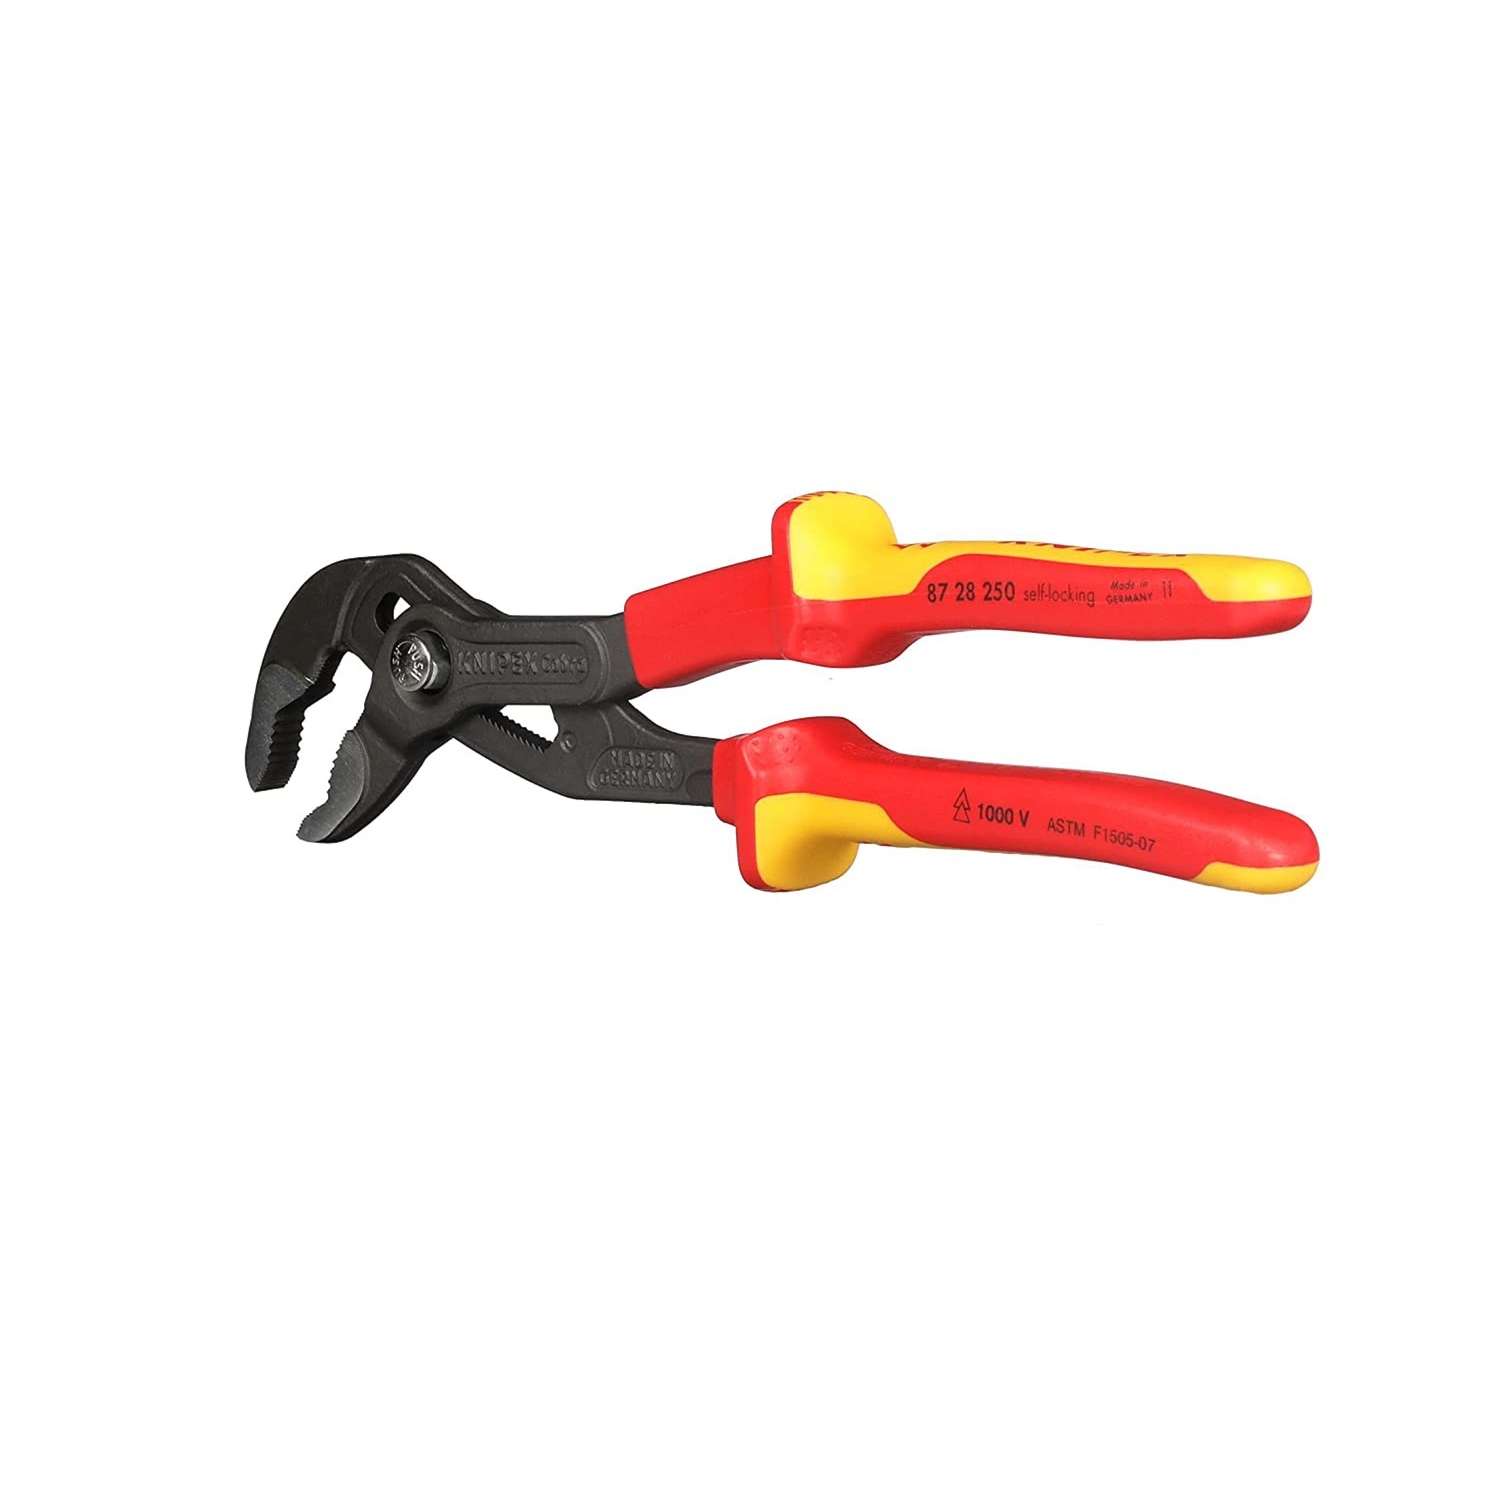 Knipex 10 in. Chrome Vanadium Steel Smooth Jaw Pliers Wrench - Ace